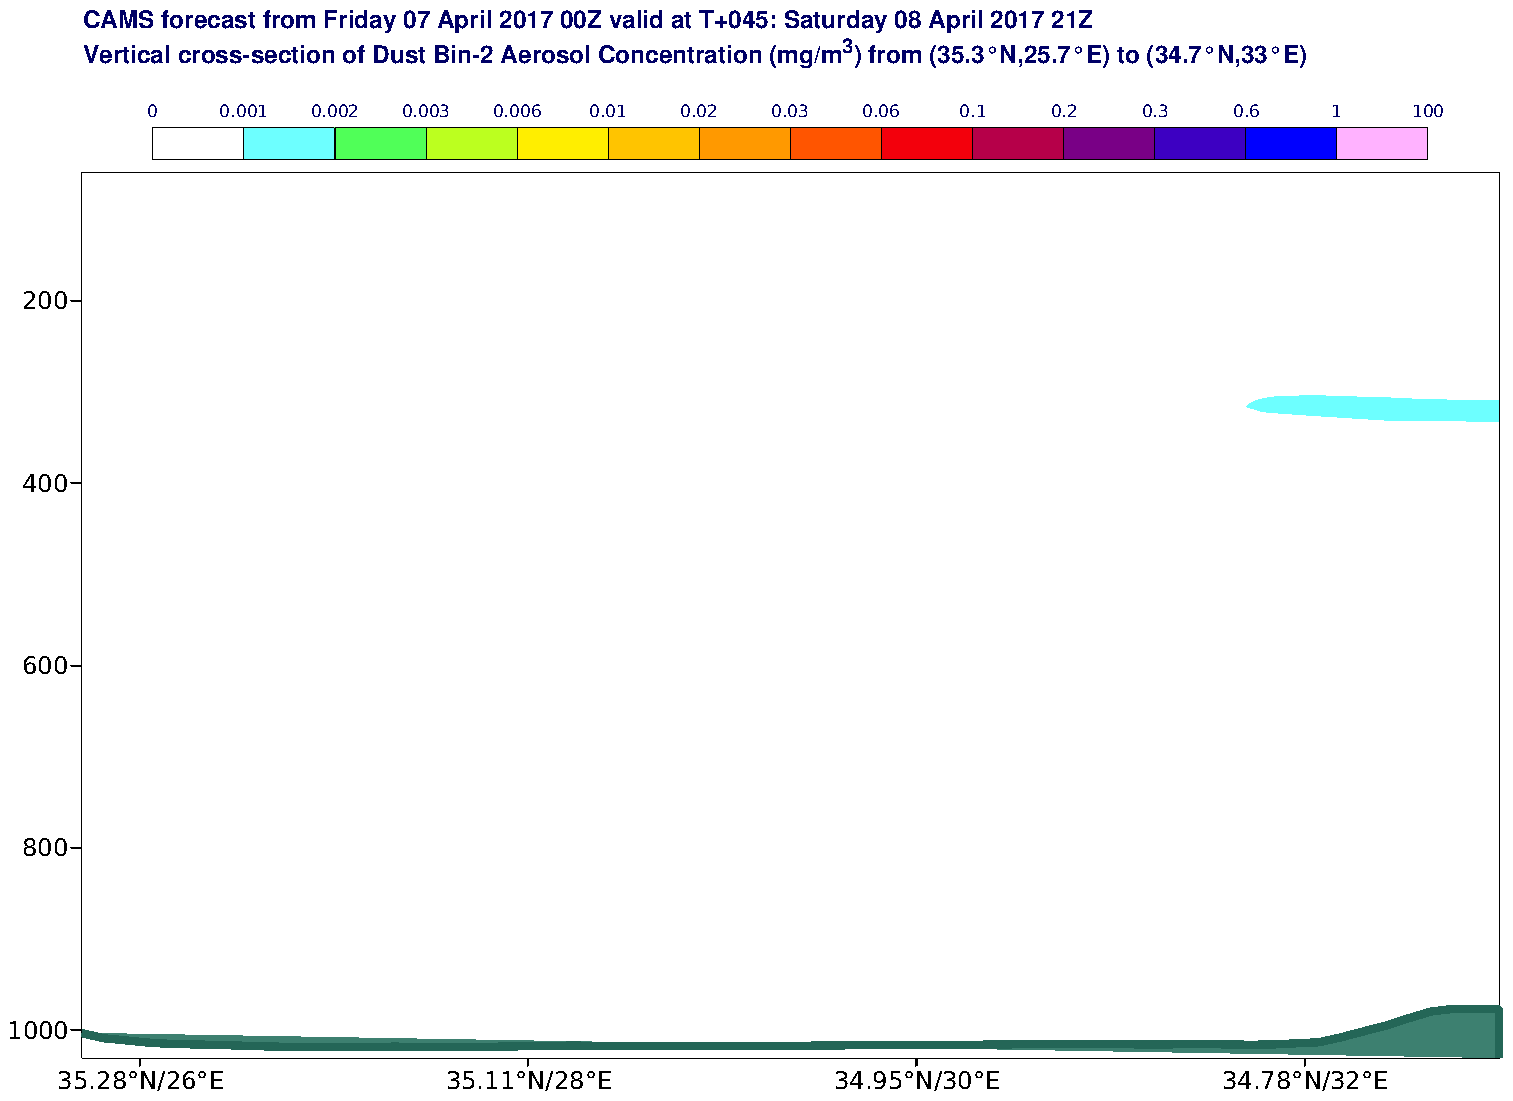 Vertical cross-section of Dust Bin-2 Aerosol Concentration (mg/m3) valid at T45 - 2017-04-08 21:00